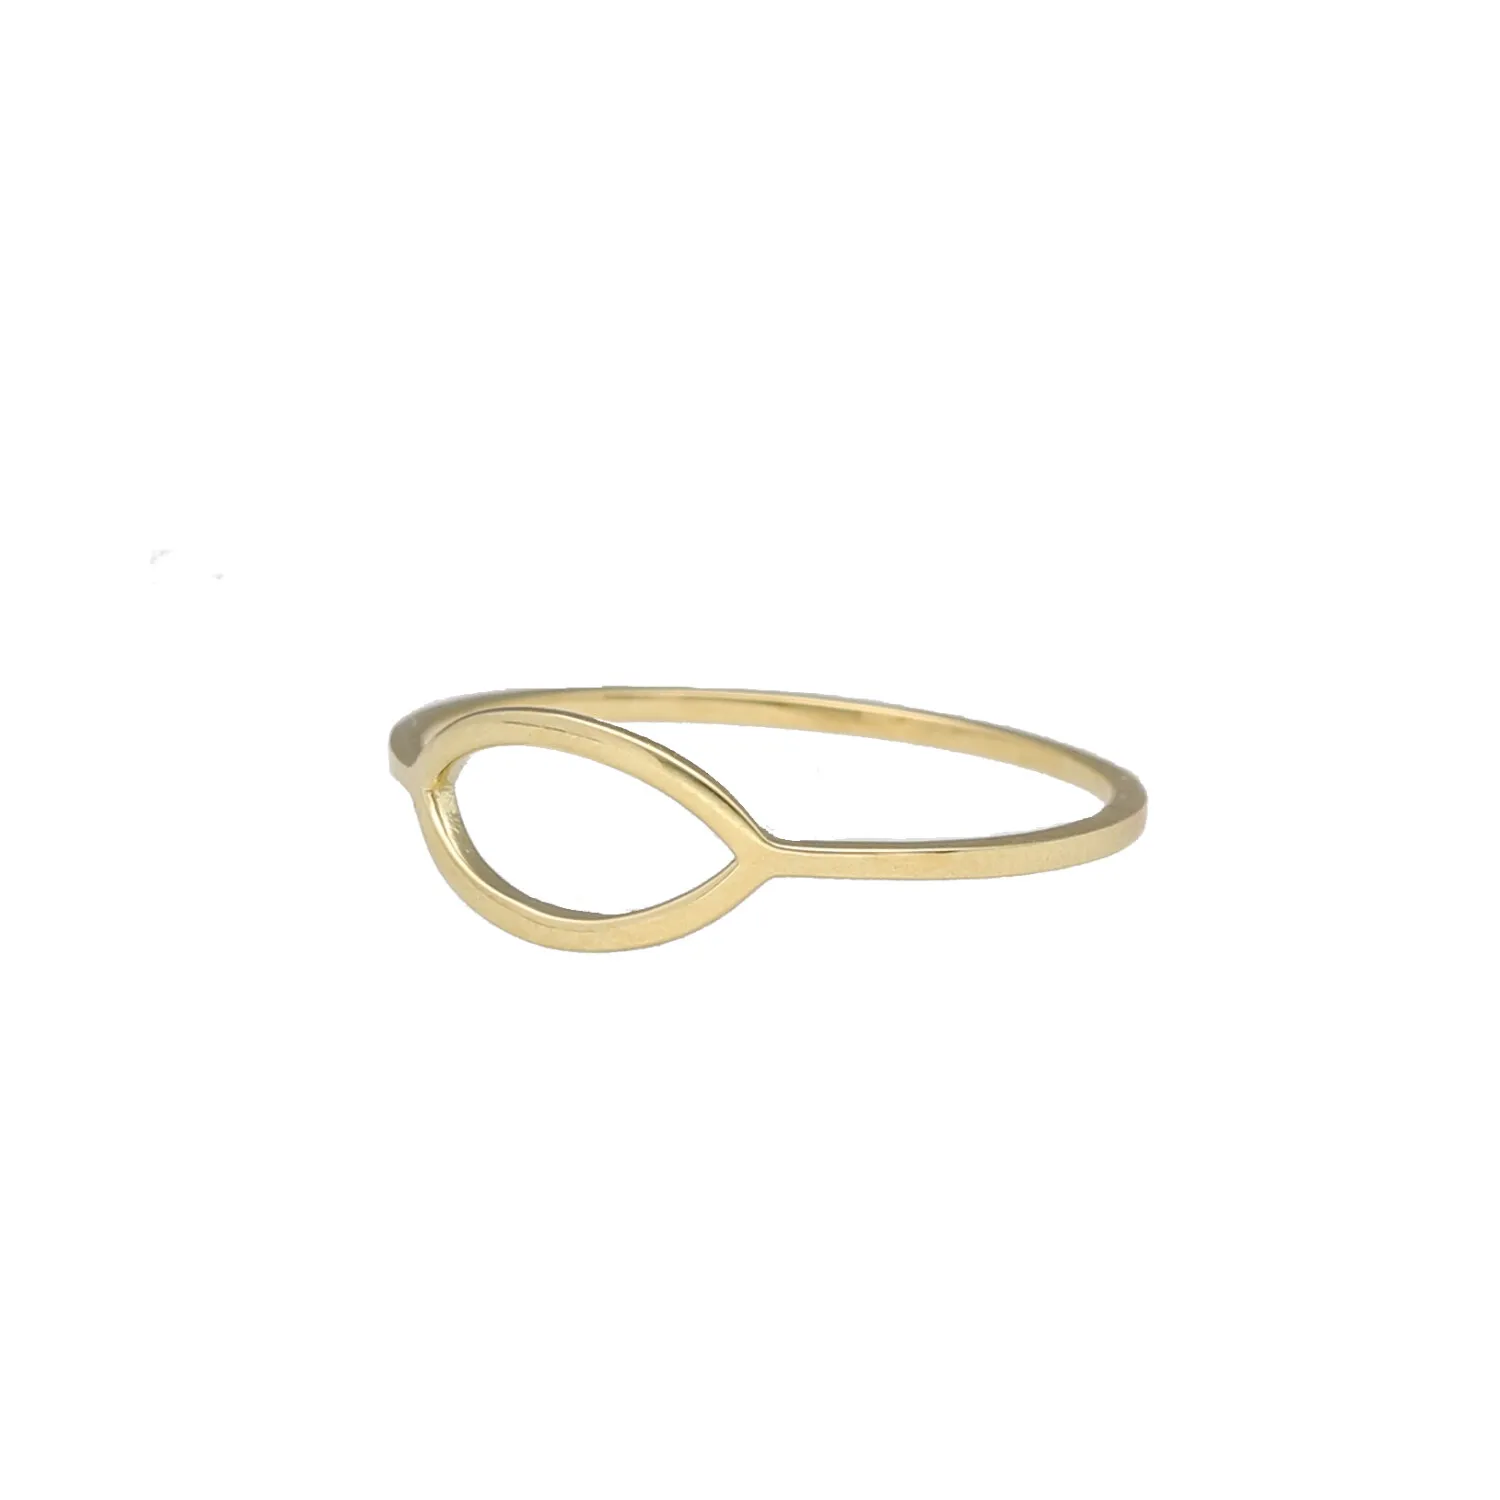 High-quality oval gold ring with a modern and elegant design